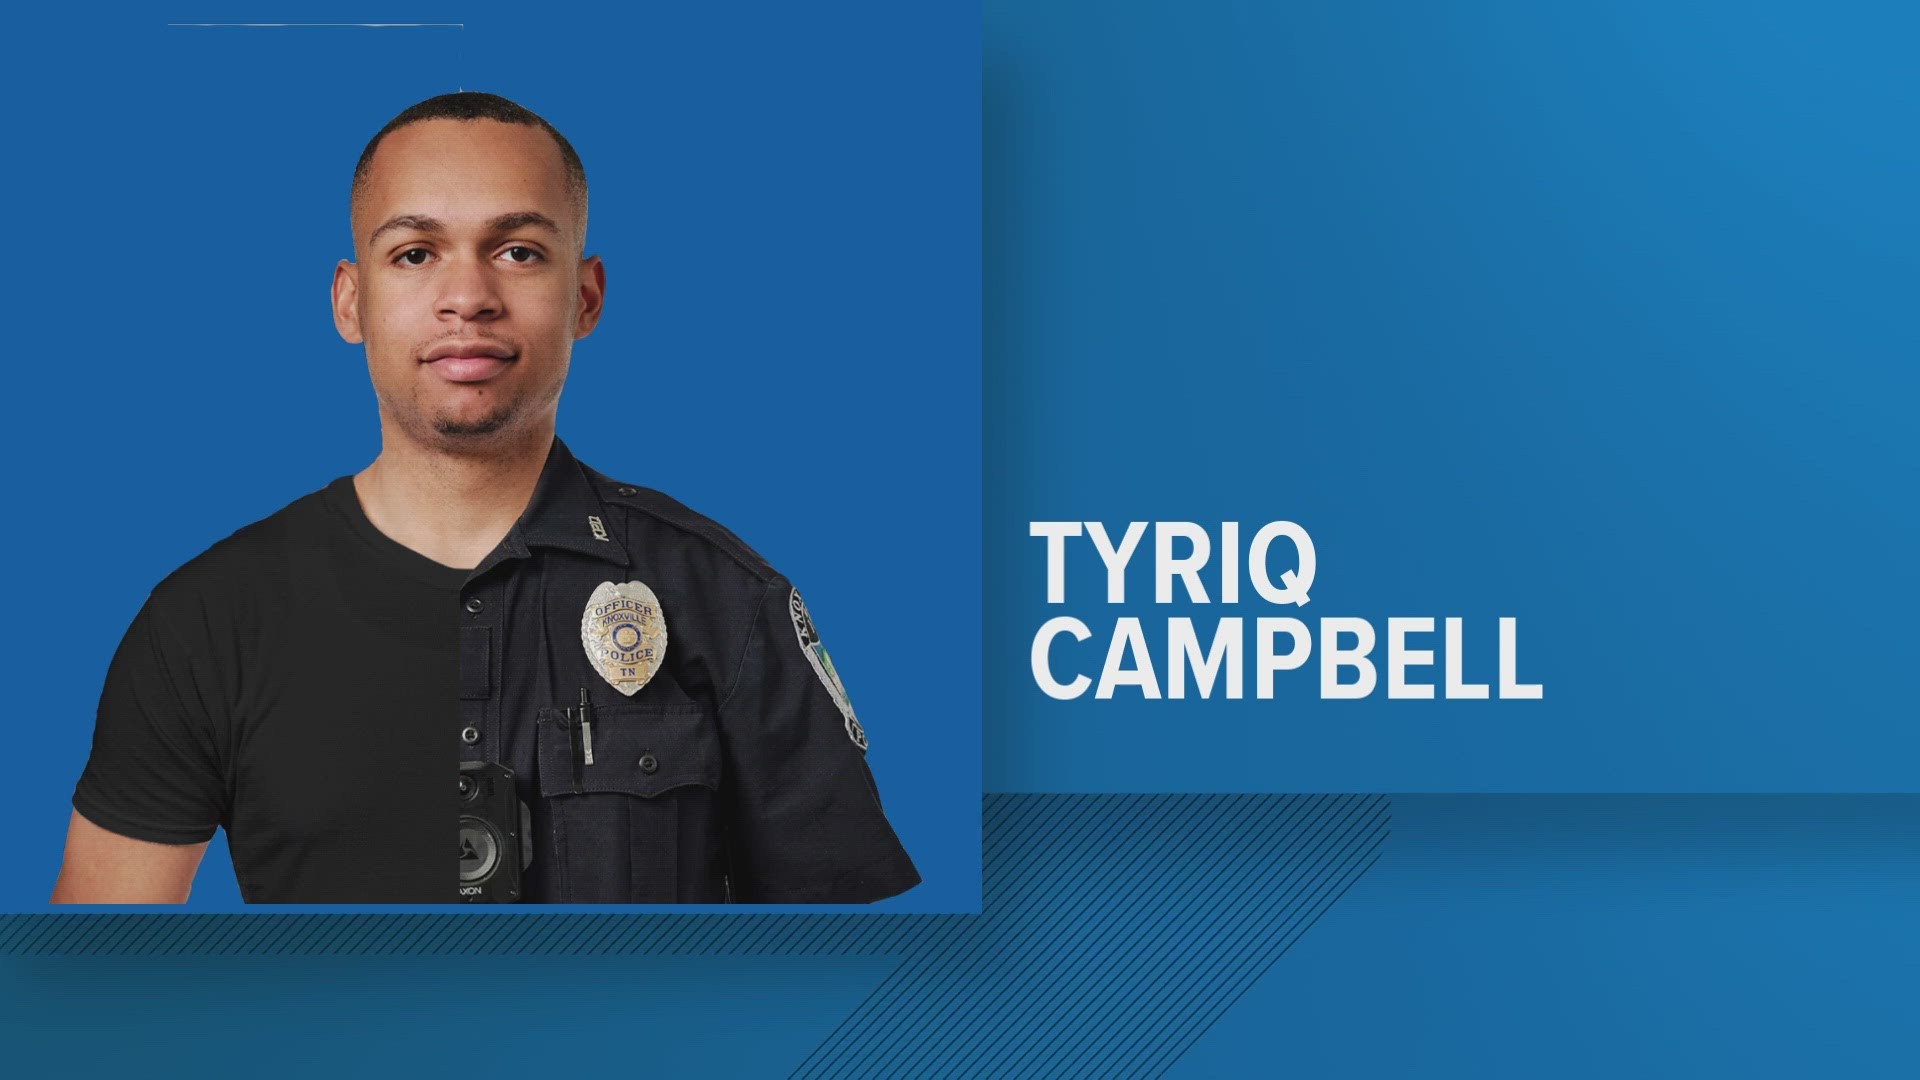 Tyriq Campbell has been in KPD's TeleServe unit since fleeing a Cookeville apartment in March, during which he suffered injuries.